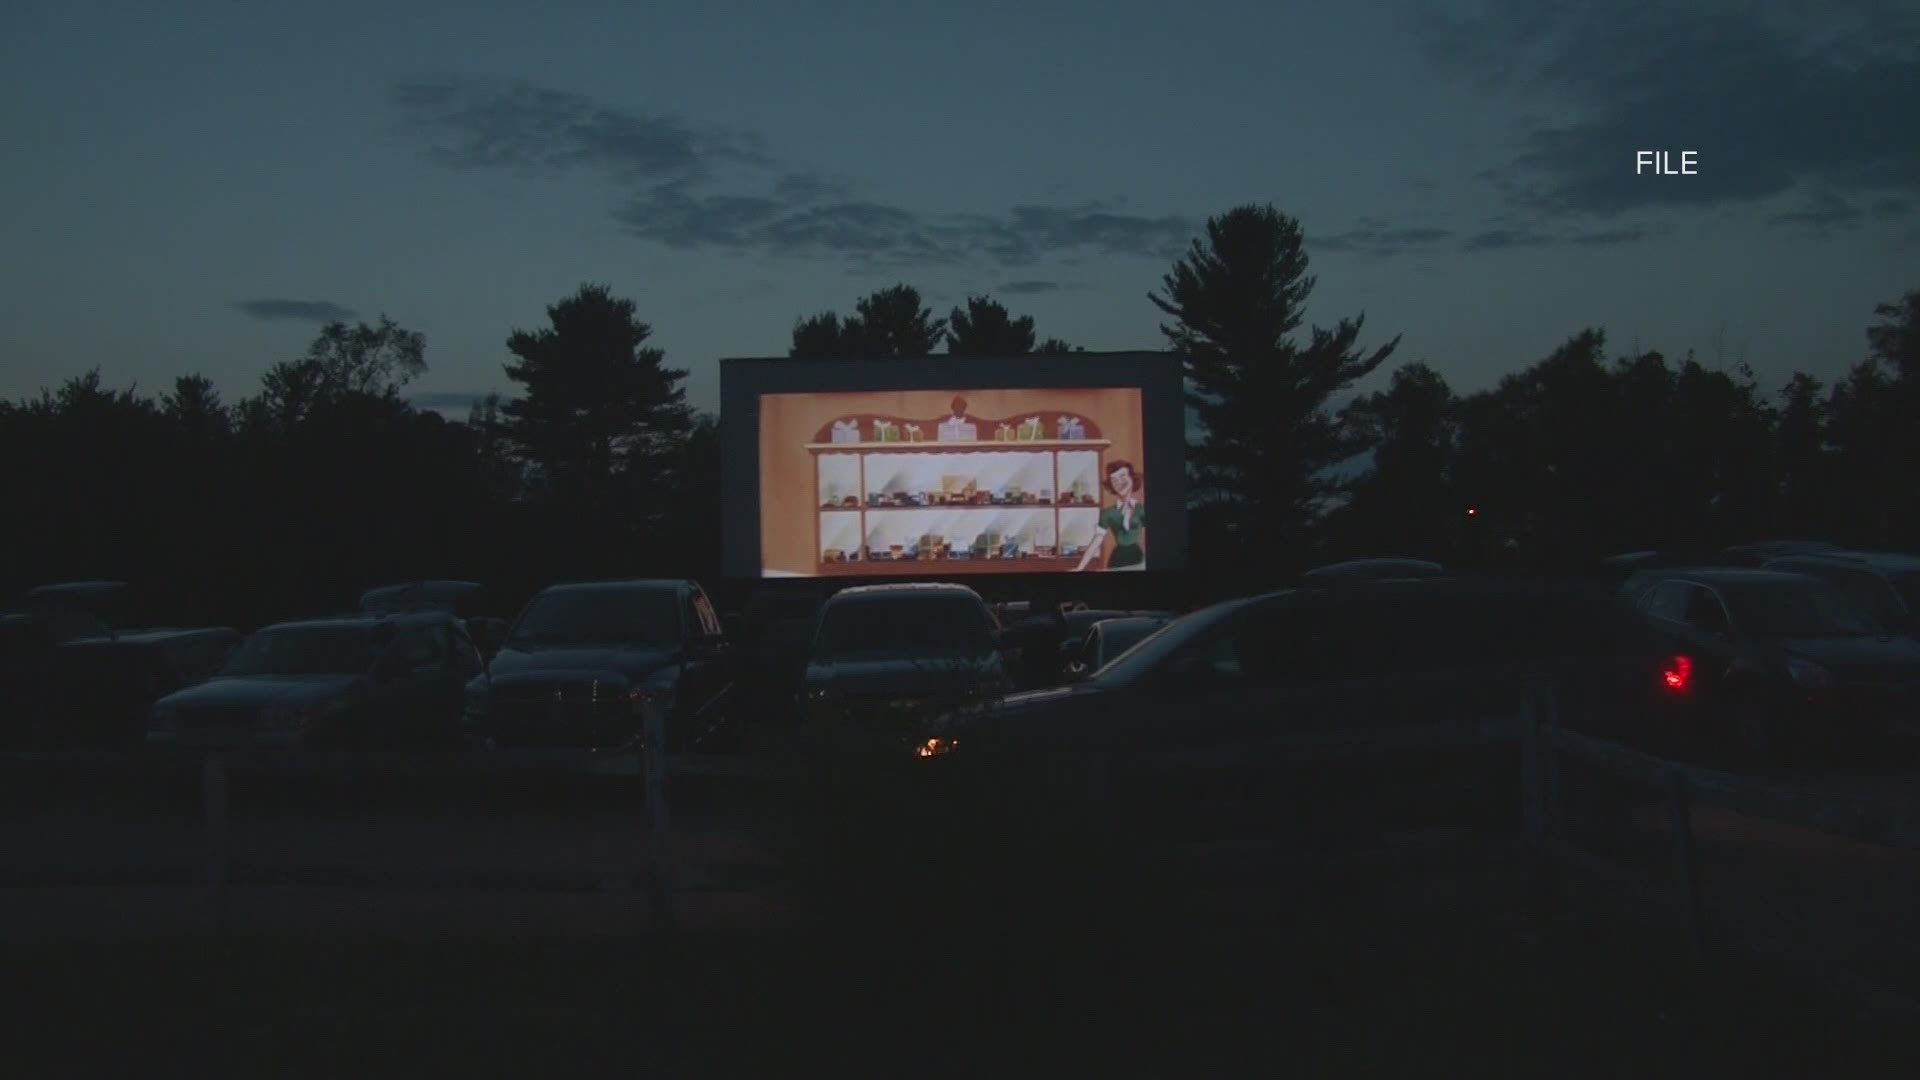 Narrow Gauge Cinema in Farmington opened its drive-in Thursday night with a sellout.